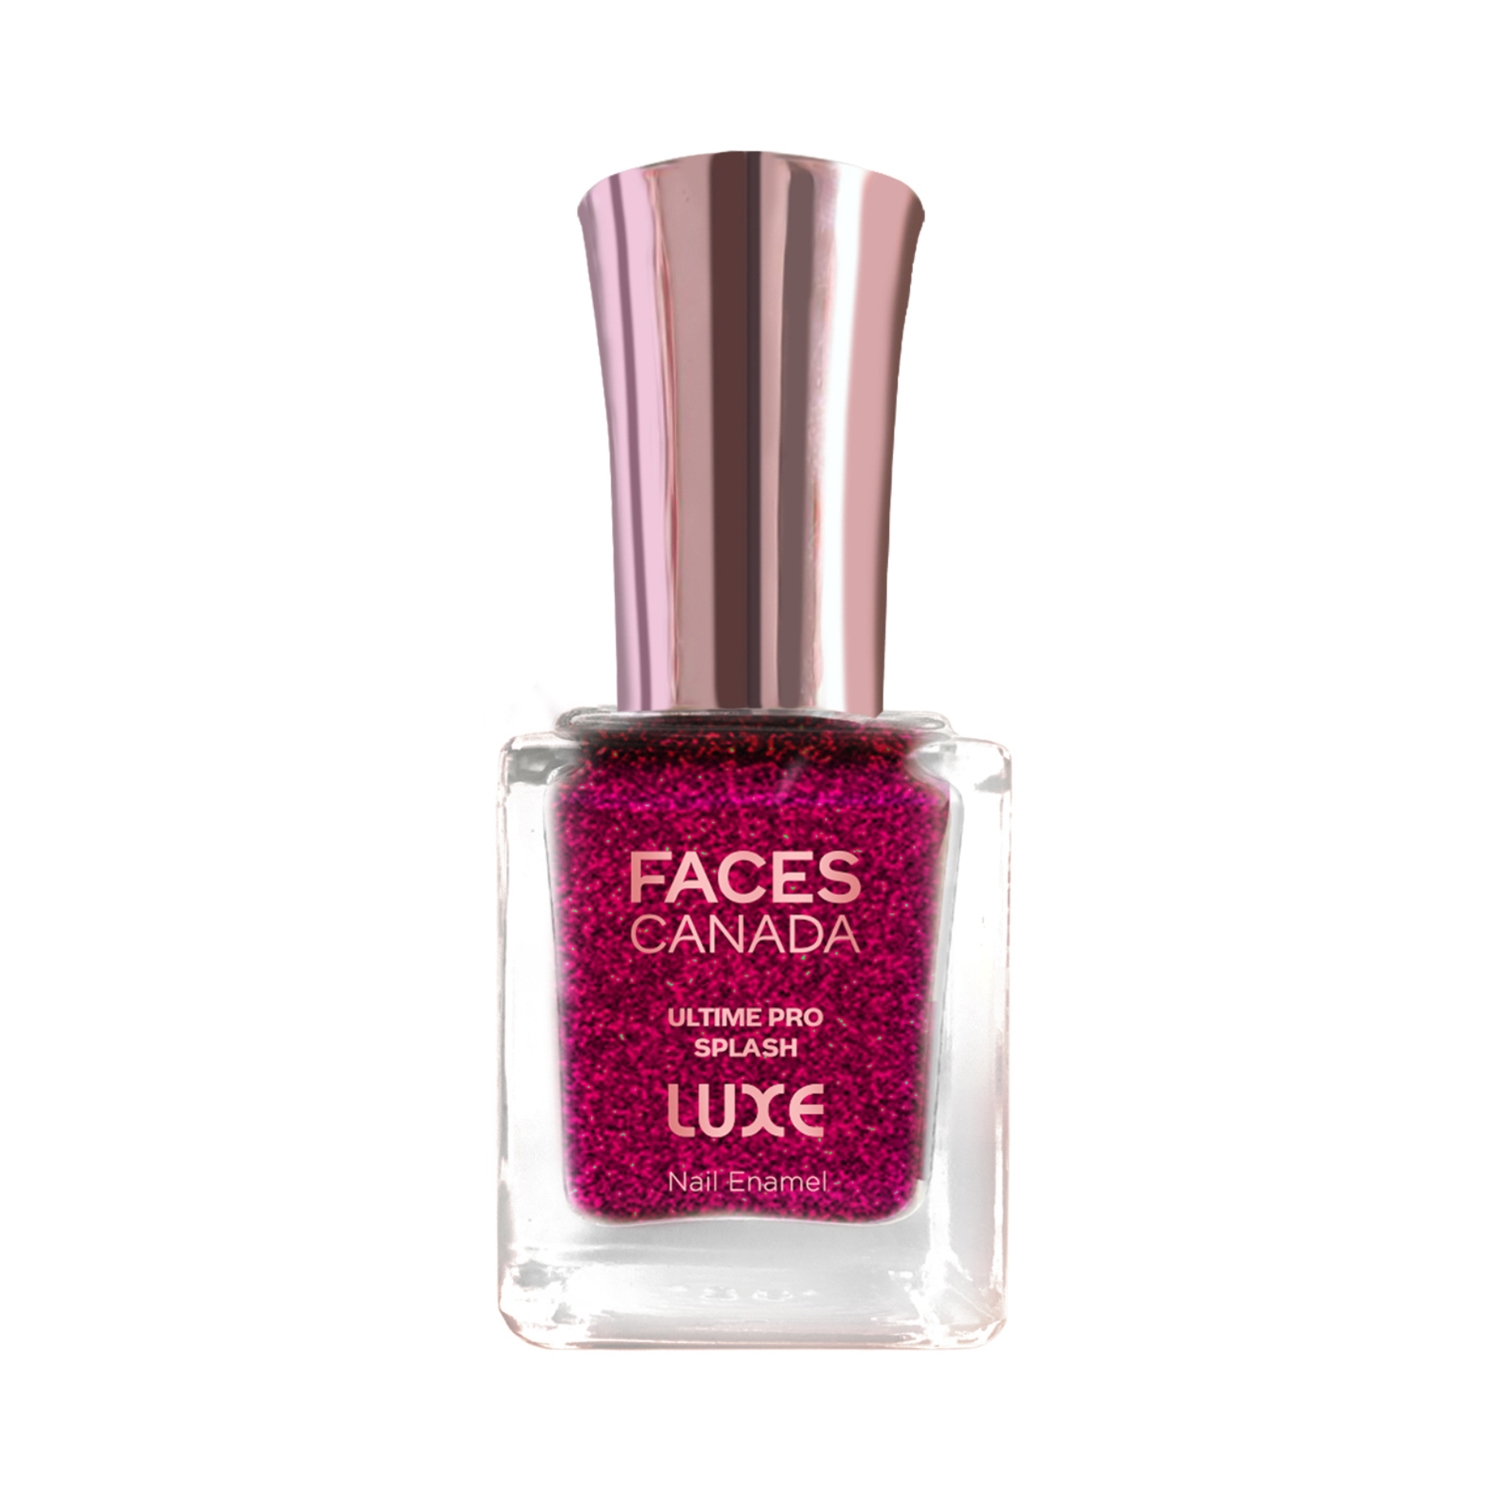 Faces Canada | Faces Canada Ultime Pro Splash Luxe Nail Enamel - L18 Ruby Rush (12ml)